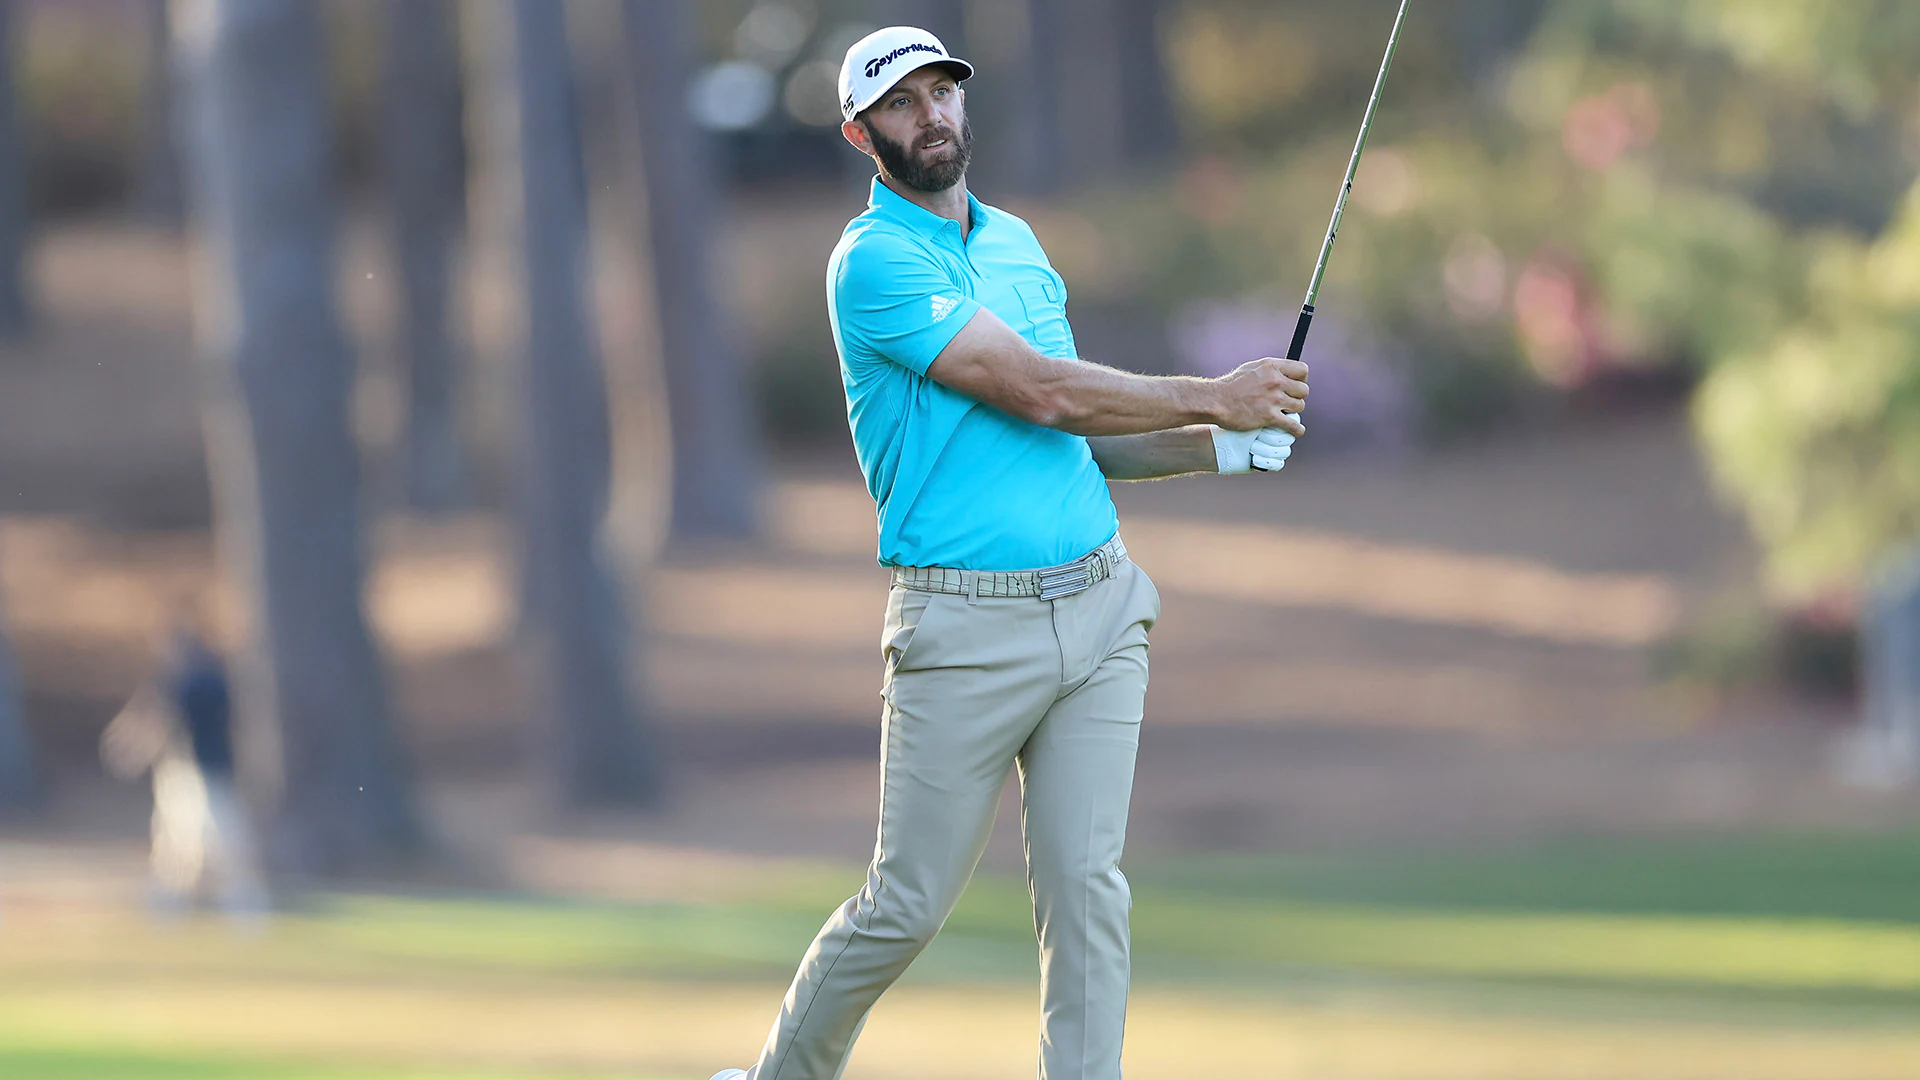 Despite lackluster day with driver, Dustin Johnson near top of Masters leaderboard